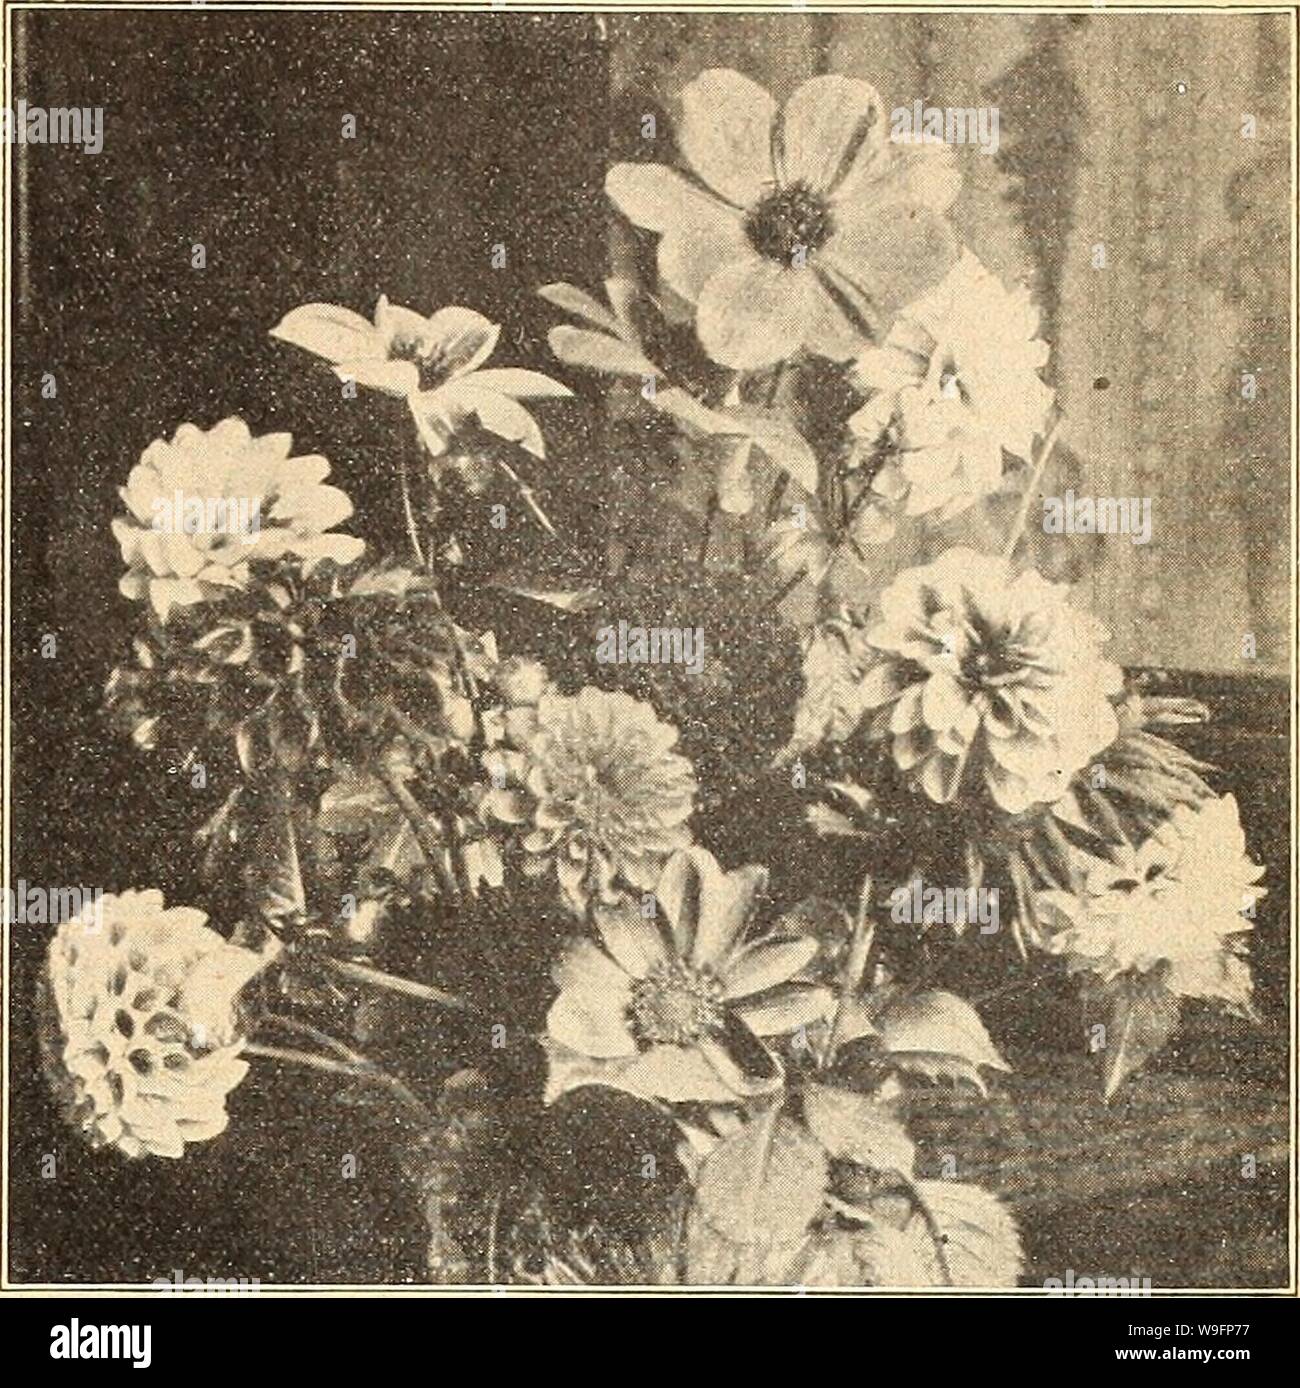 Archive image from page 60 of Currie's farm and garden annual. Currie's farm and garden annual : spring 1927 52nd year  curriesfarmgarde19curr 10 Year: 1927 ( LIST OF CHOICE FLOWER SEEDS FOR 1927. 55 DAHLIA Bloom from Seed the First Season. For fine massing effects sow Dahlia Seed inside in March or April, transplanting to small pots and planting out when safe, setting a foot apart. Save roots of the most promising sorts. Dahlia. Coltness Hybrids—This splendid new clpss of single Dahlias, originated from the popular Dahlia, Coltness Gem. The plants are of neat compact habit, averaging about 18 Stock Photo